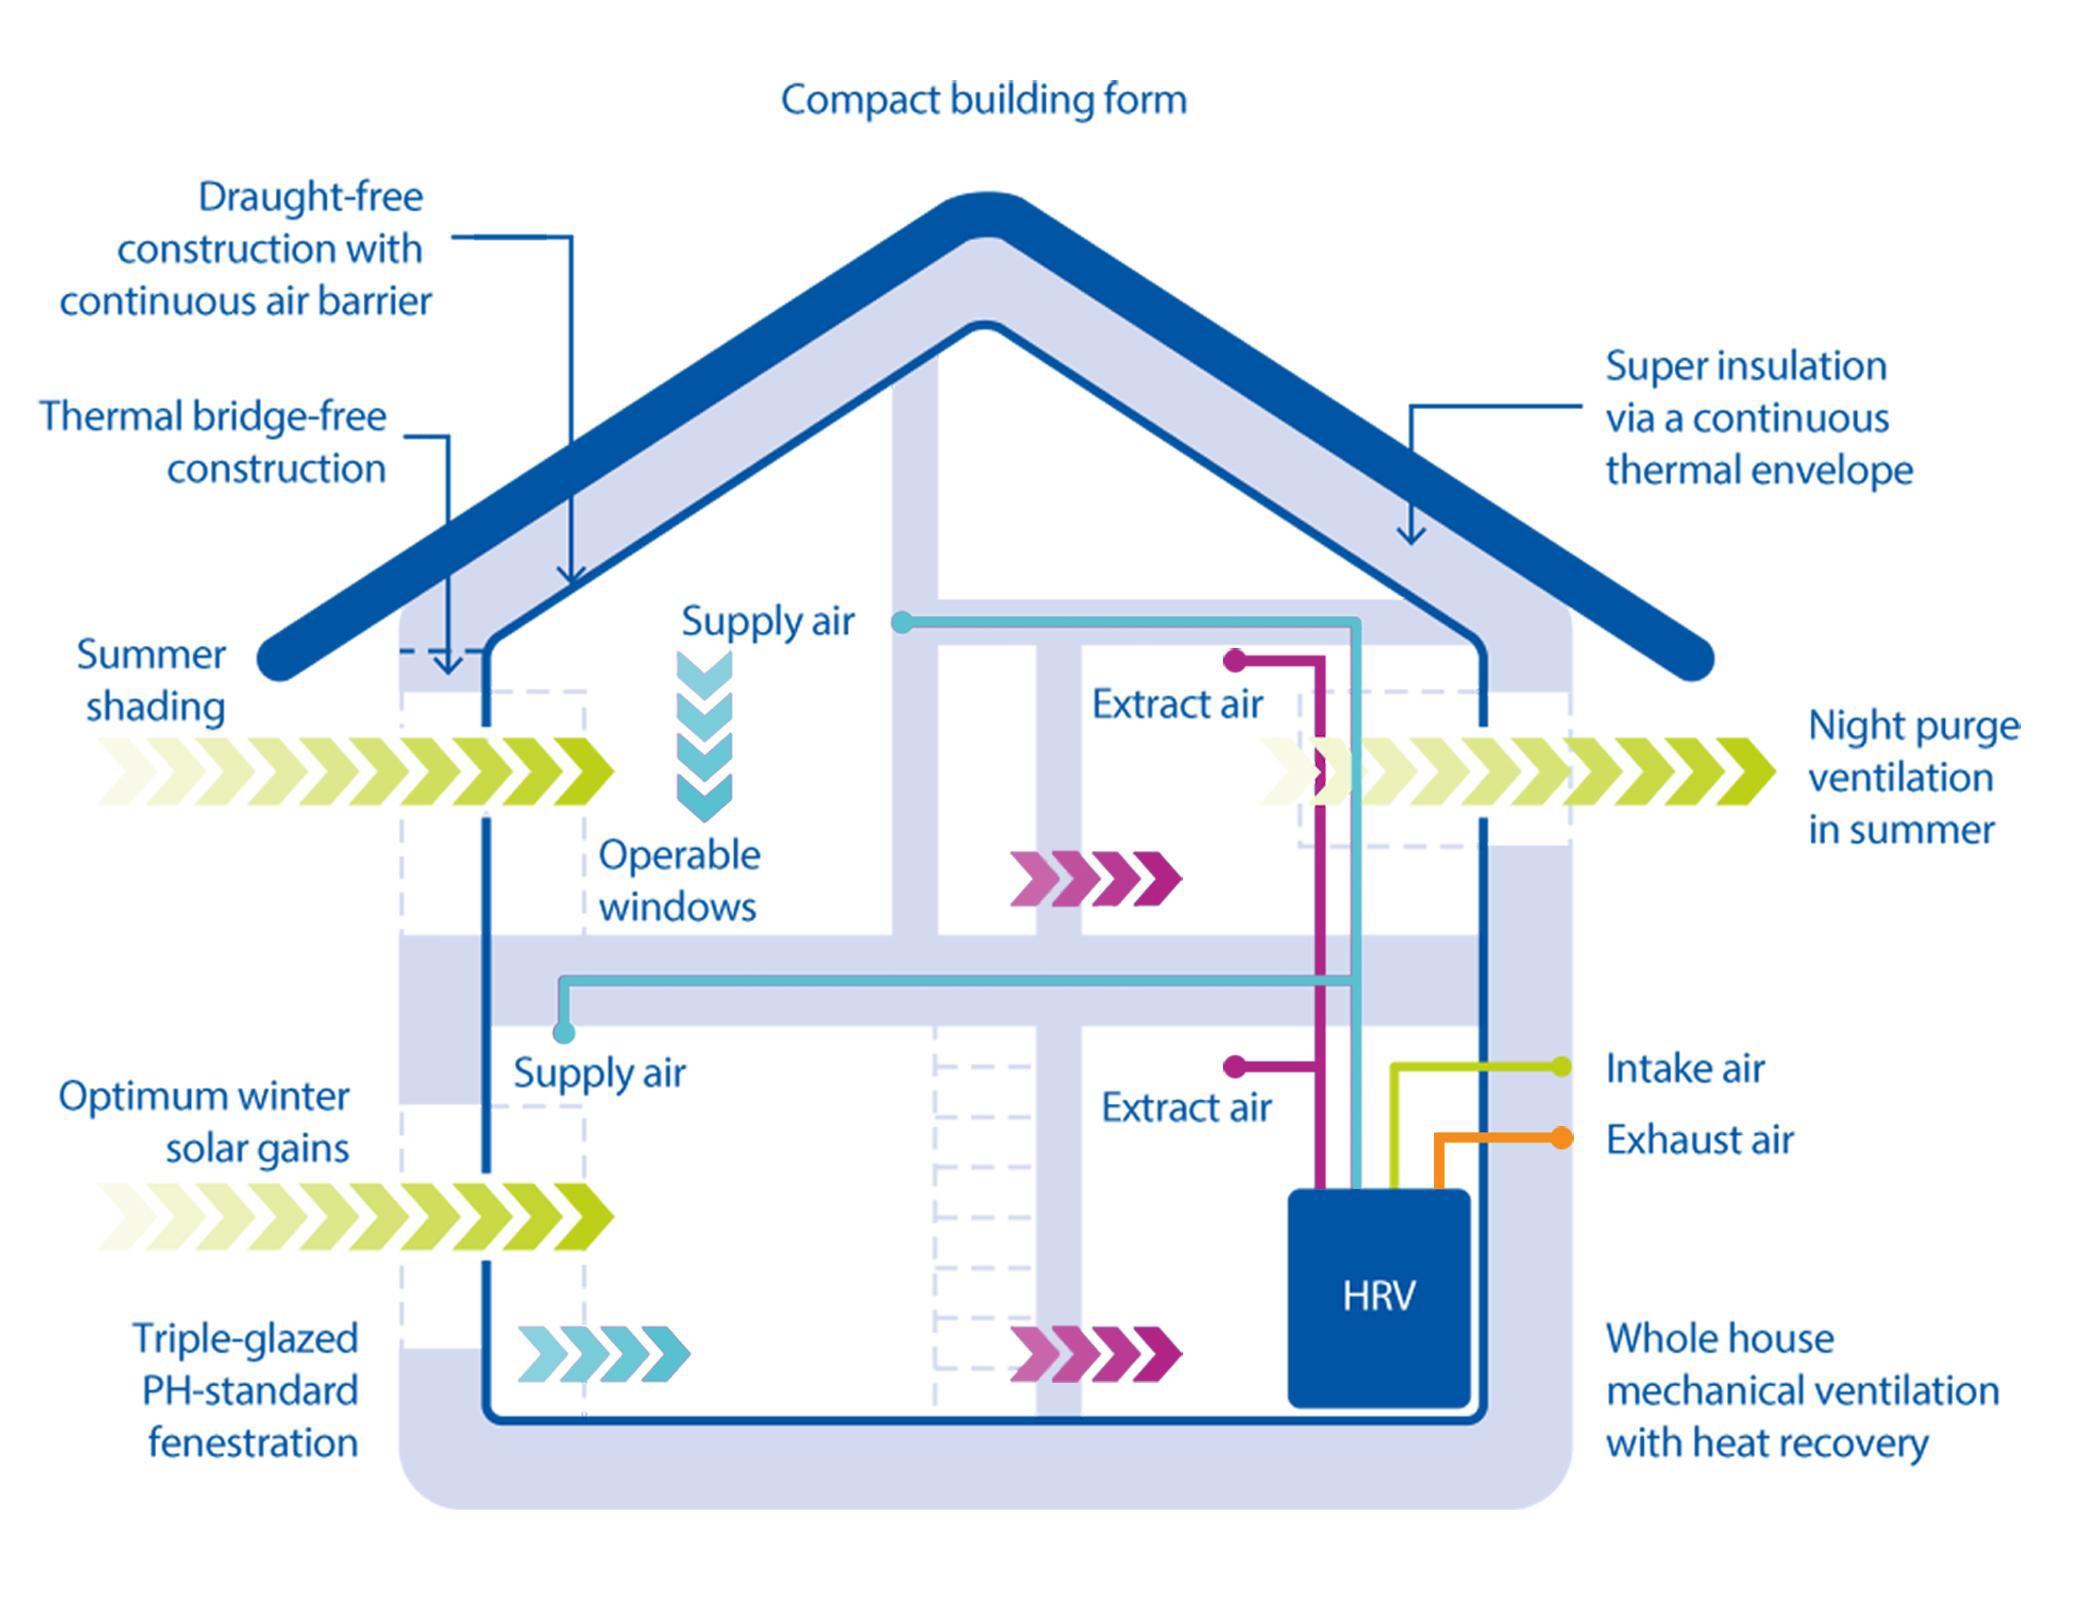 Passivhaus buildings are comfortable with good air quality, low running costs, and low carbon emissions